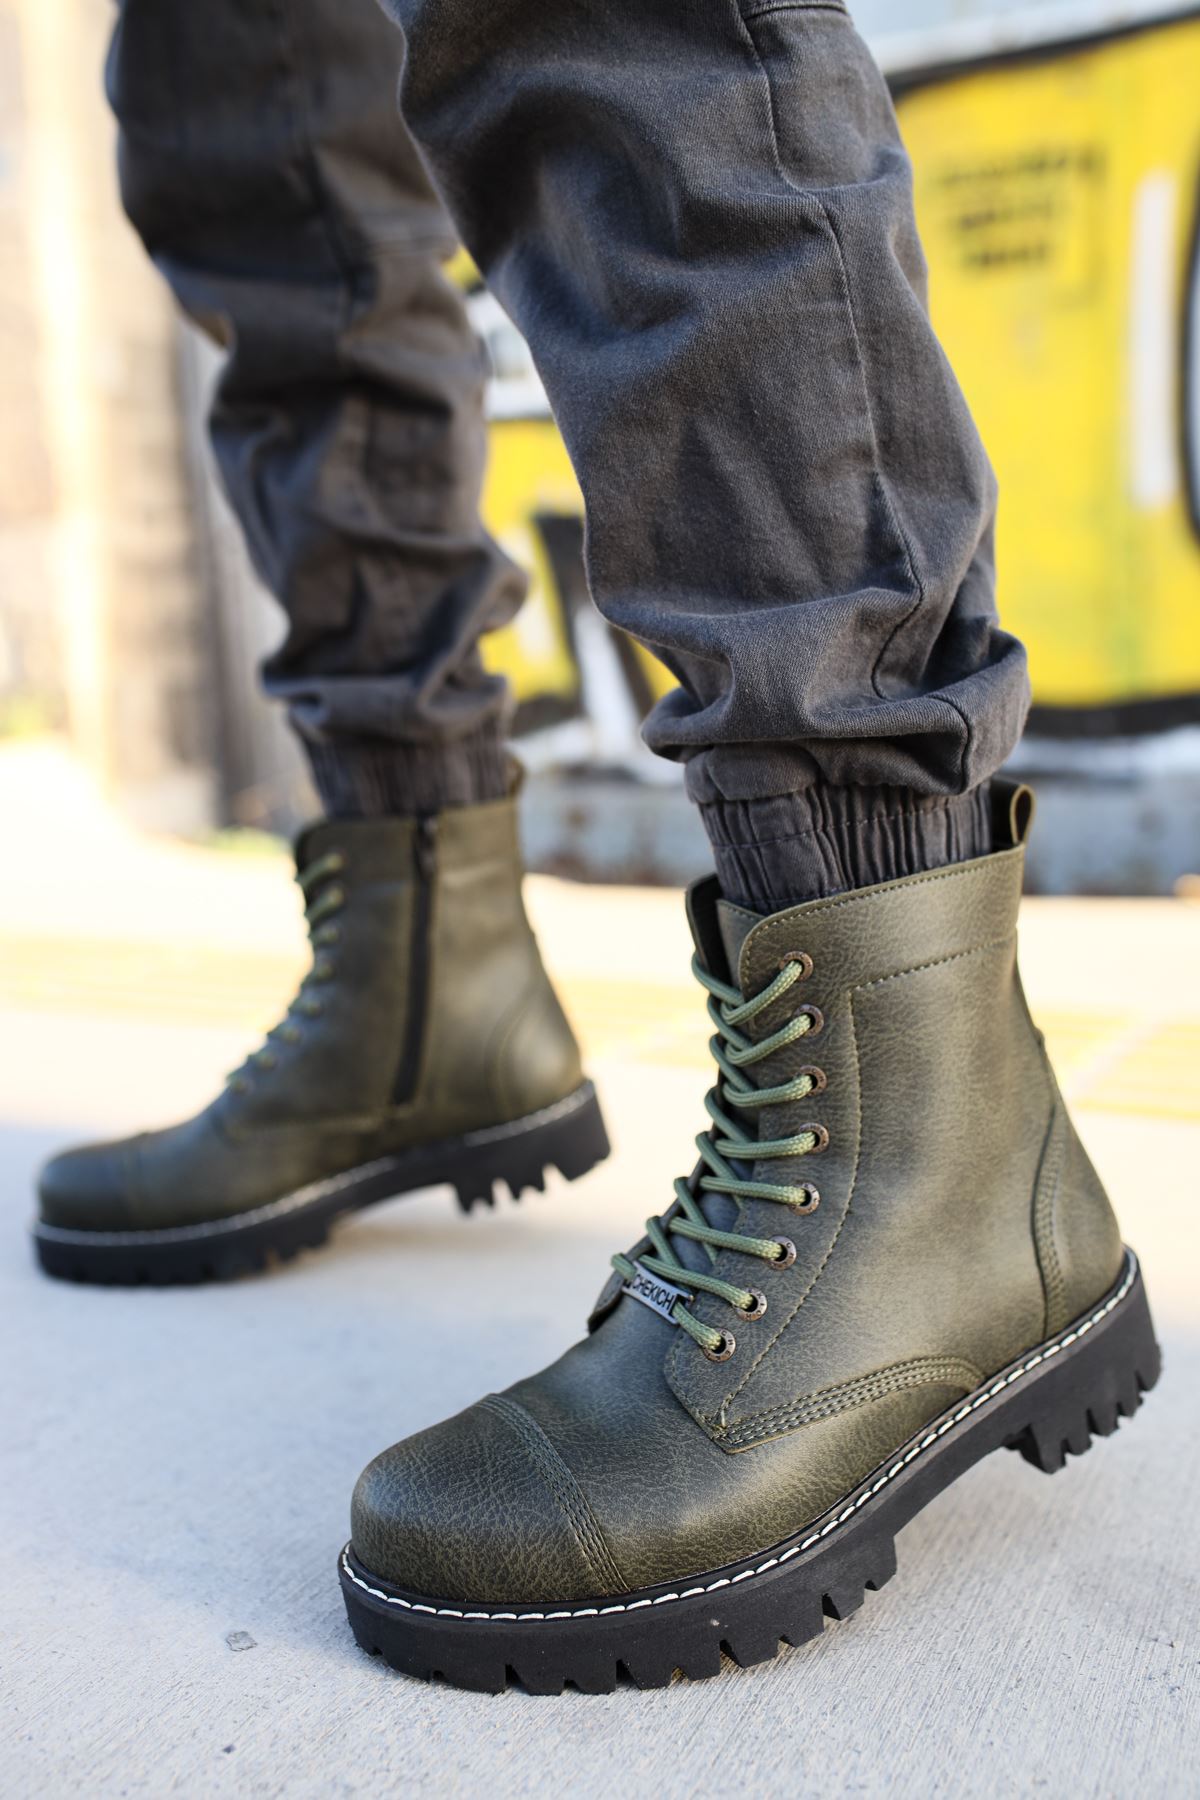 Black Boots for Men Non-Leather Zipper and Lace-up Winter Season Snow Ankle Warm Comfortable High Quality Footwear Gentlemen Basic Trend Solid Fashion Male Classic Outdoor 2021 New-Arrival CH009